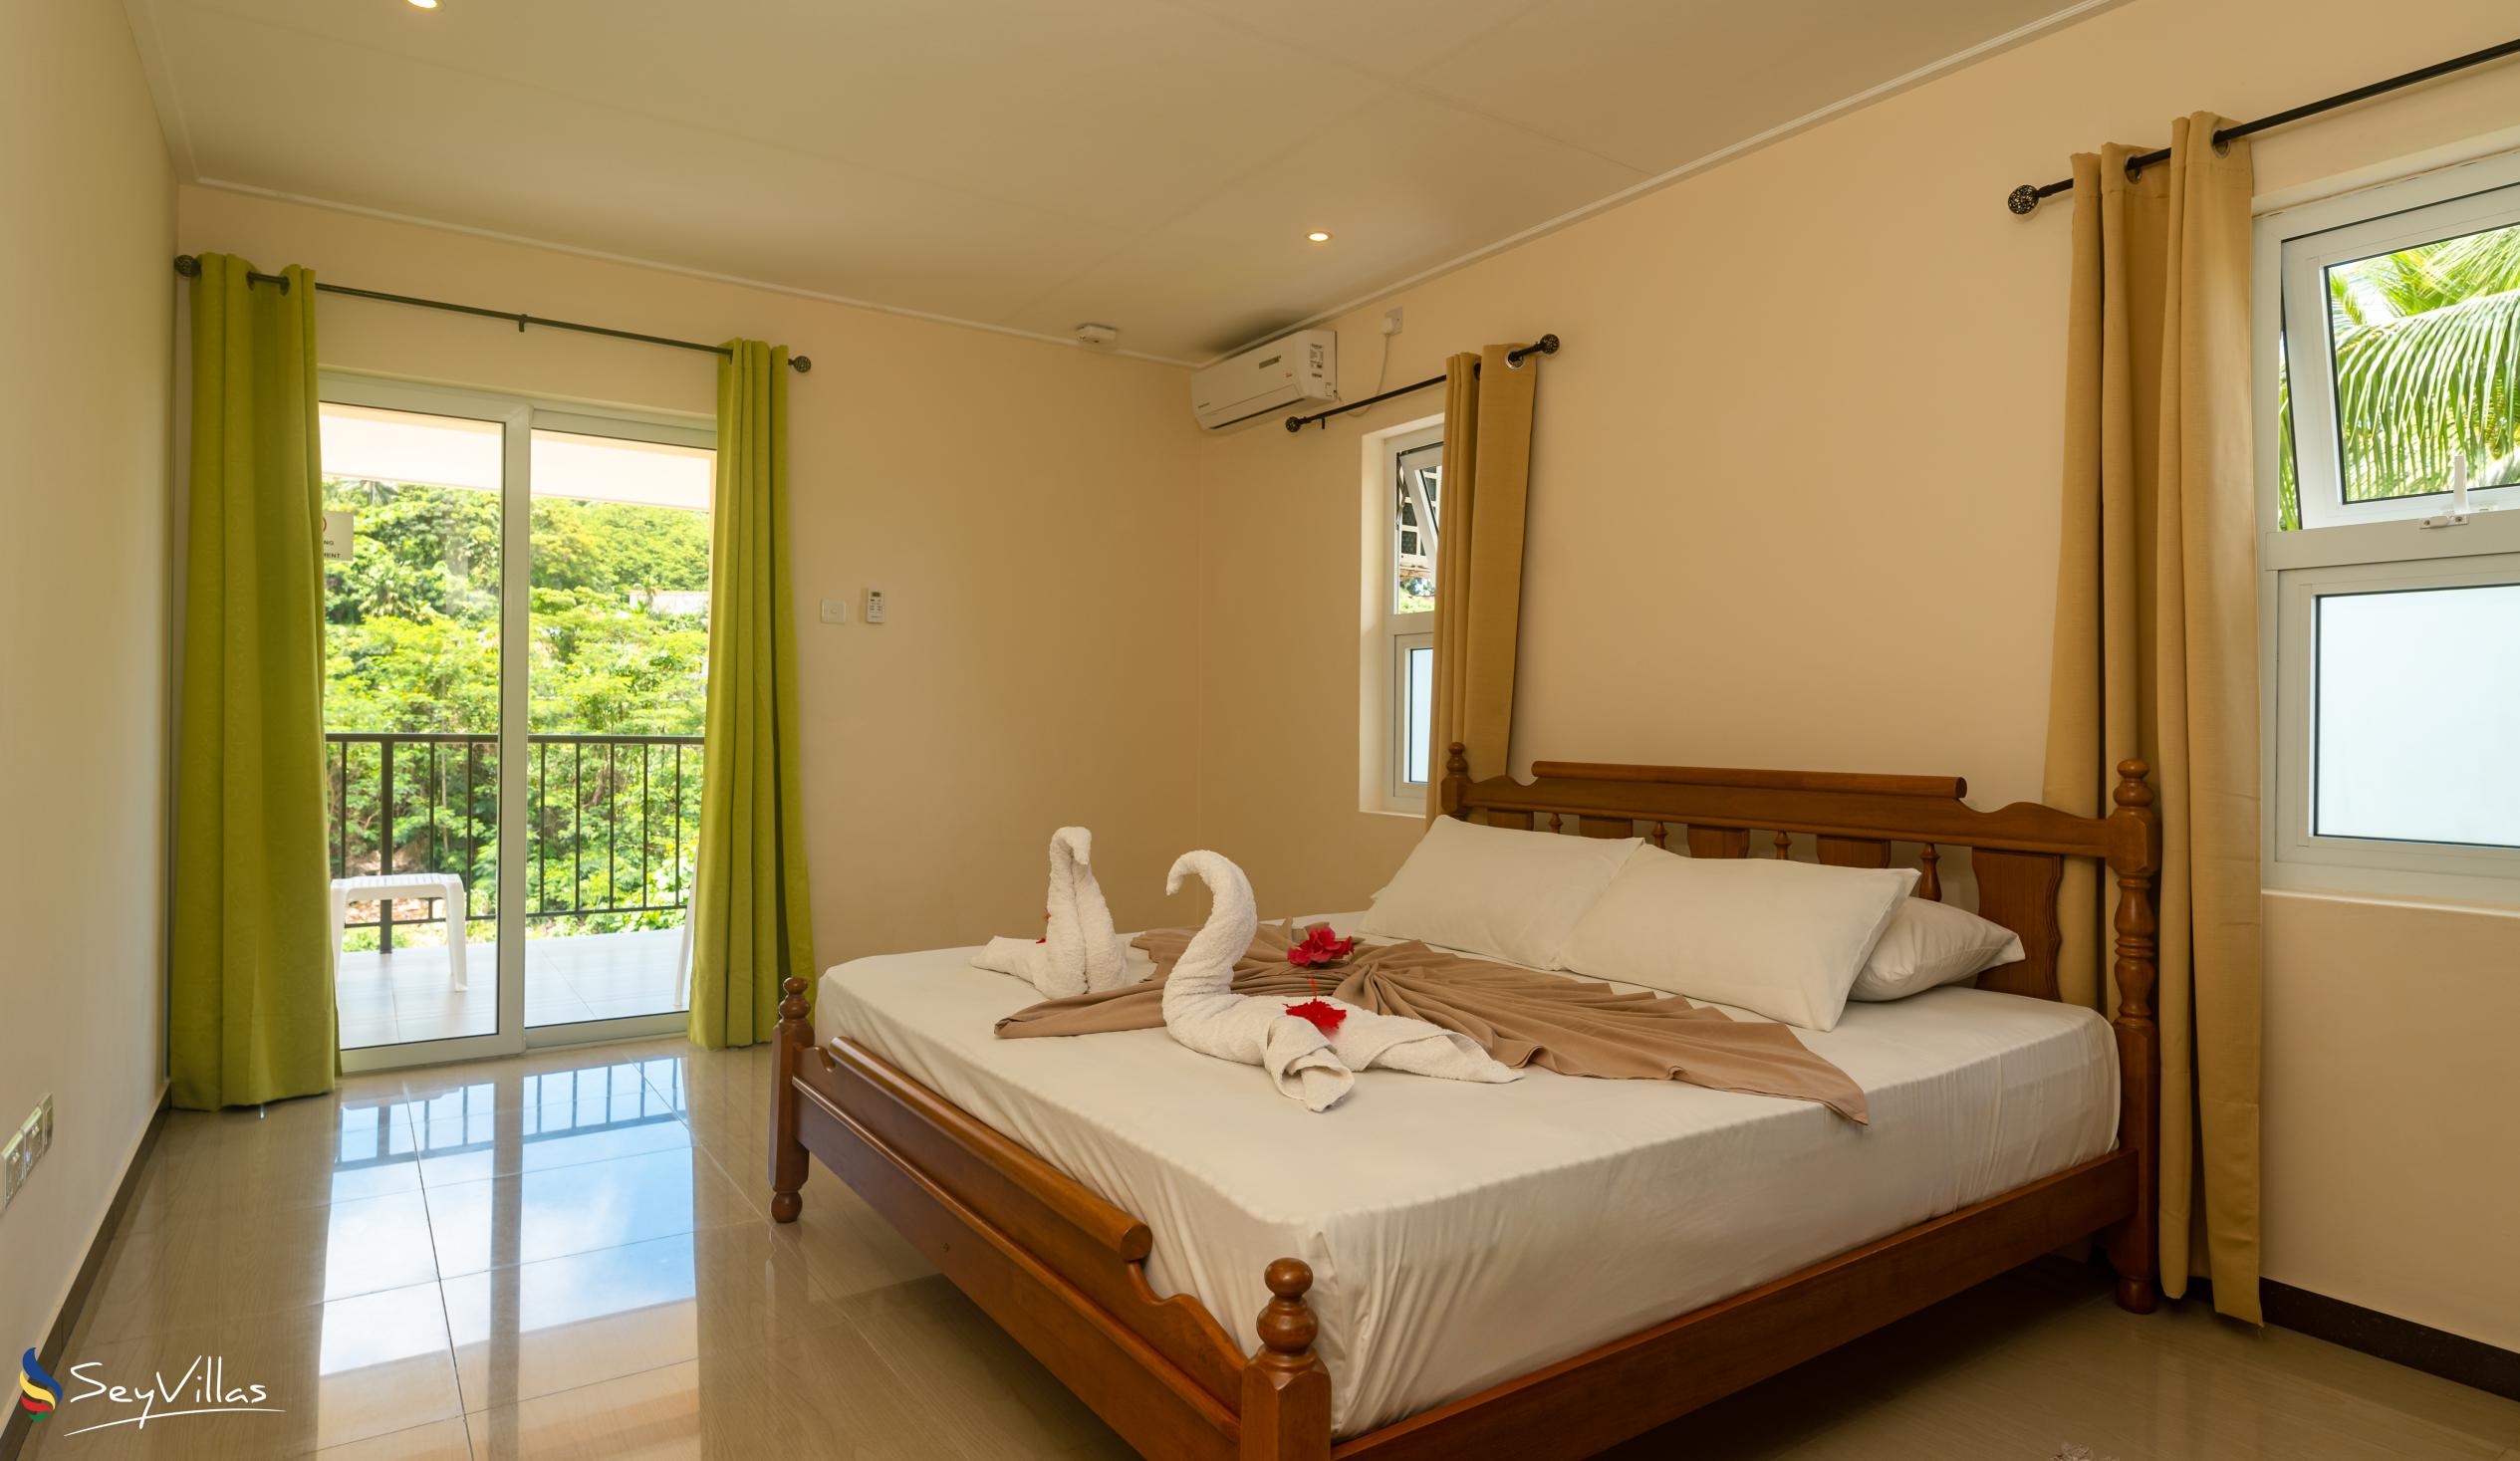 Foto 33: JAIDSS Holiday Apartments - Appartement 2 chambres - Mahé (Seychelles)